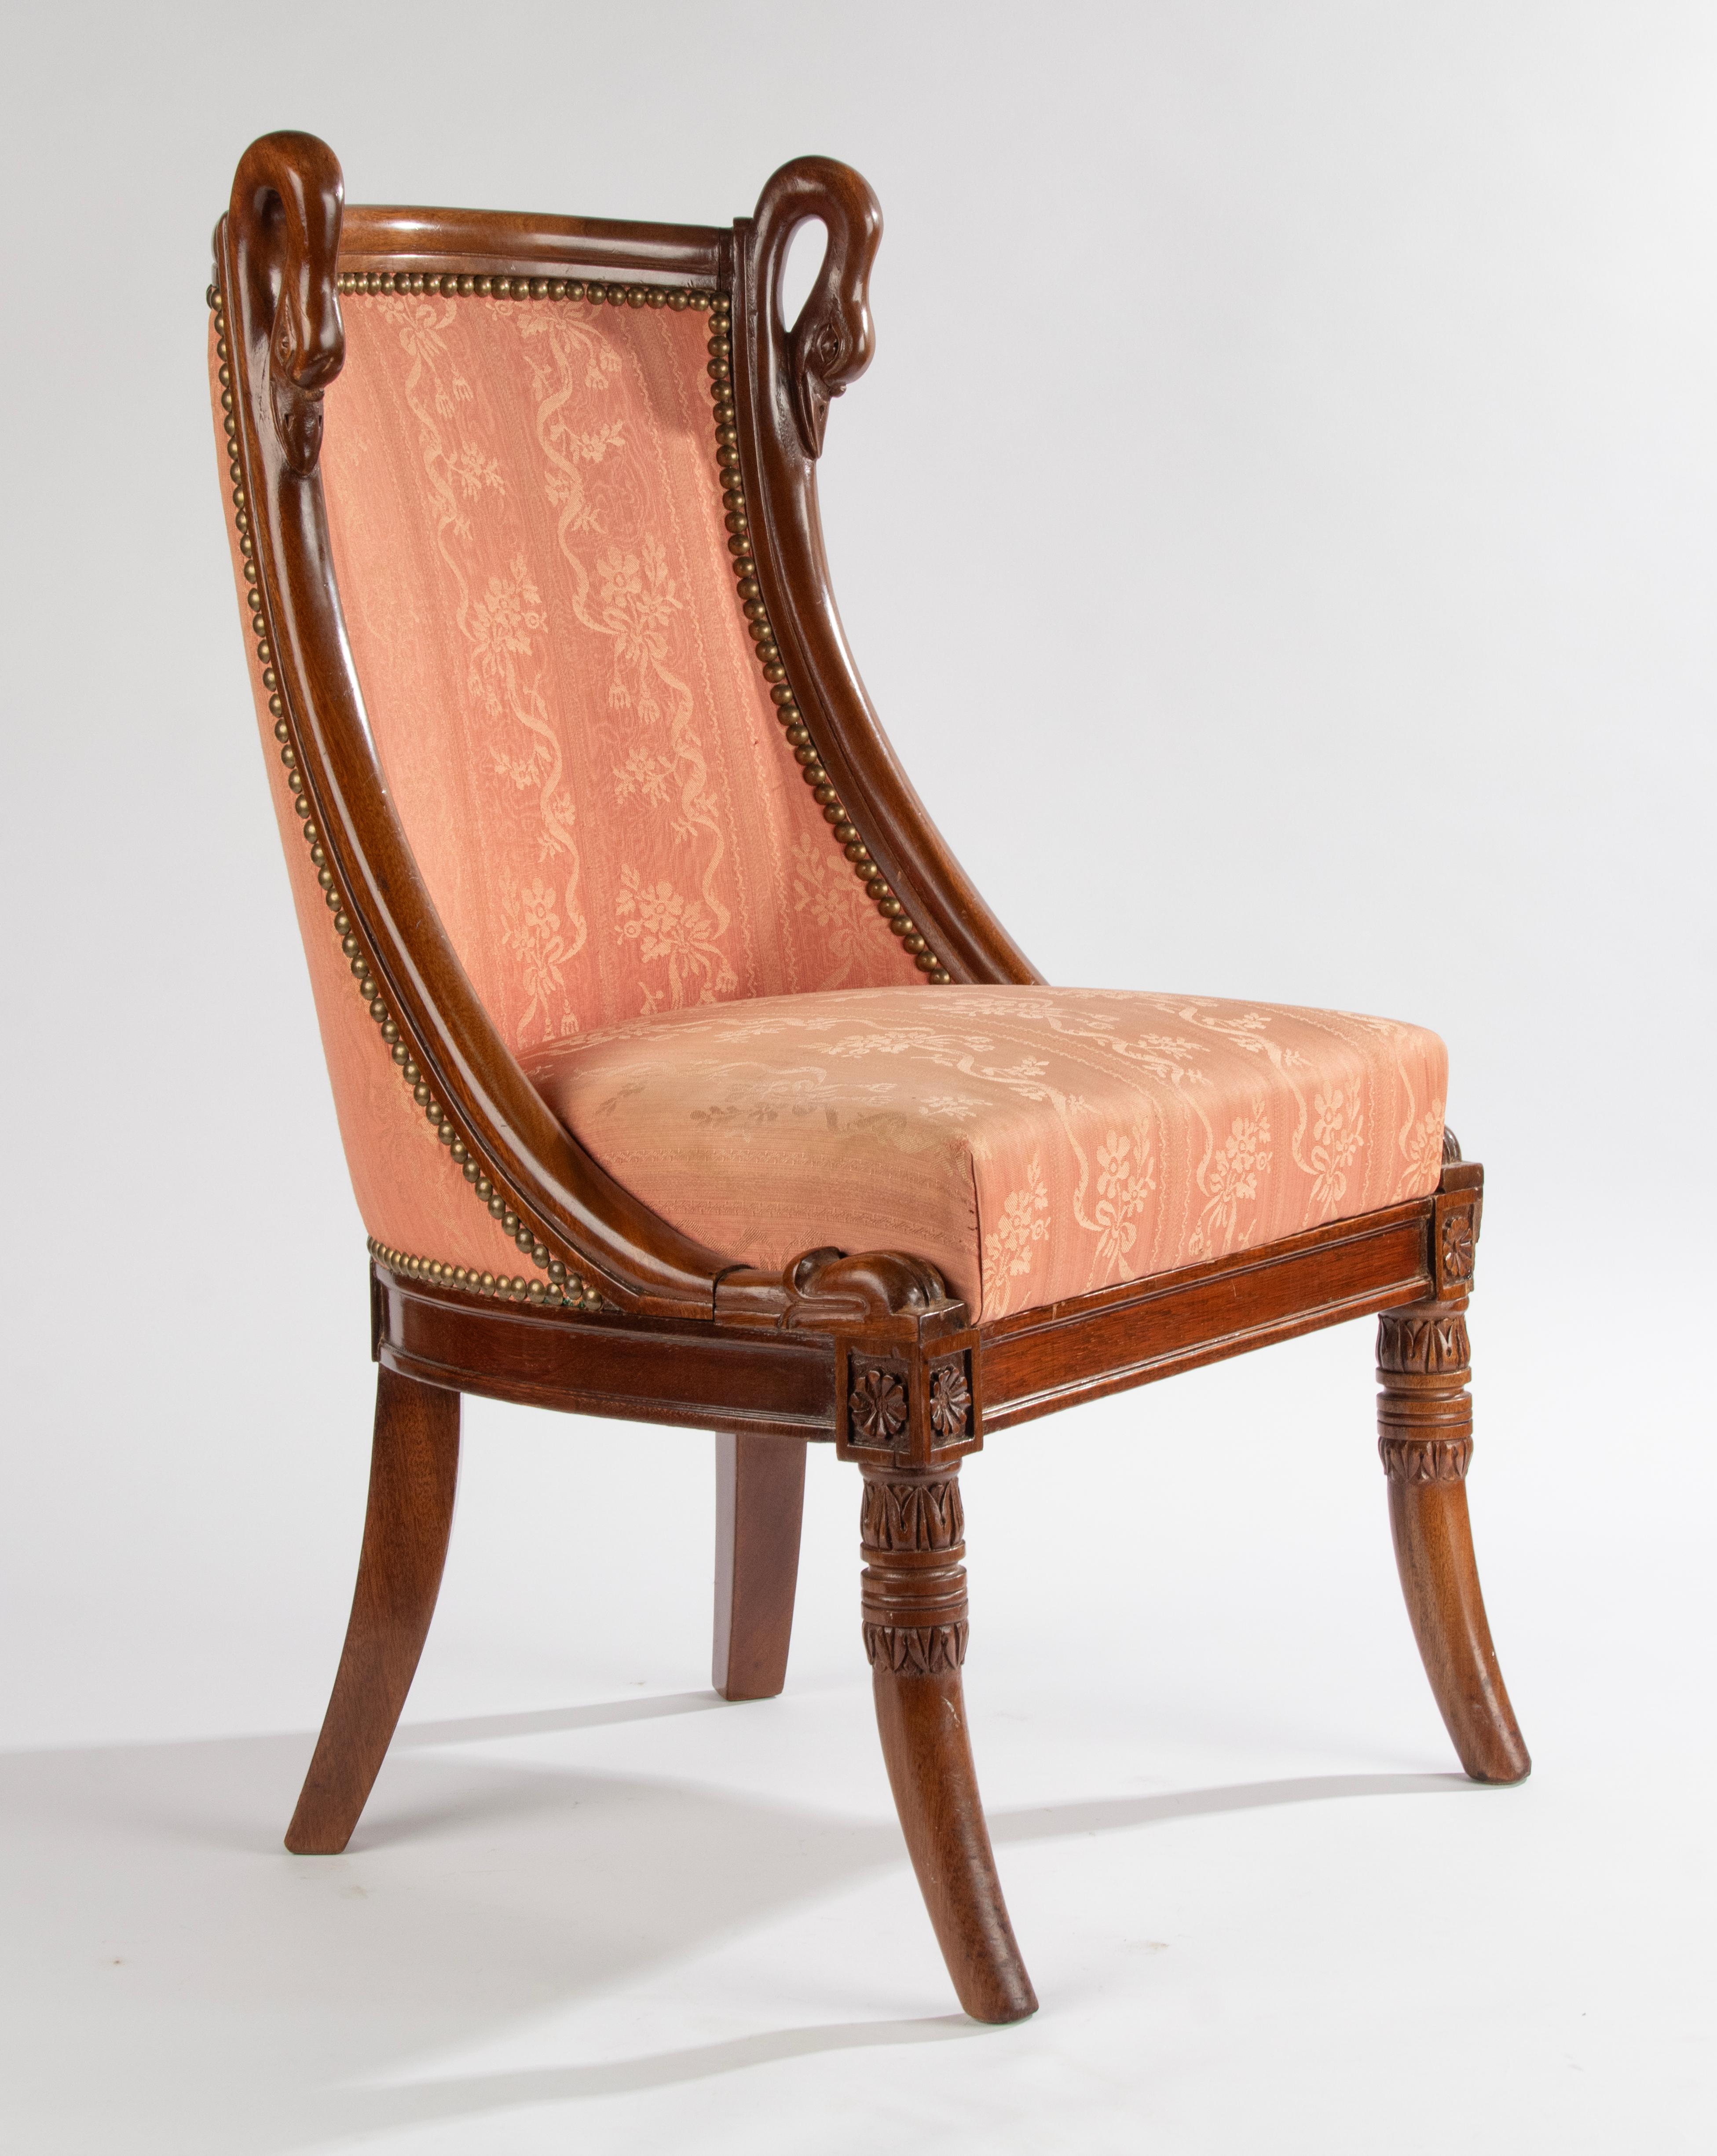 An elegant and rare childrens 'Bergère chair made in Empire style. Made of finely carved beechwood. At the top swan heads, which is a typical ornate of the Empire style. Upholstered with silk fabric. Made in France around 1880-1890. It also can be